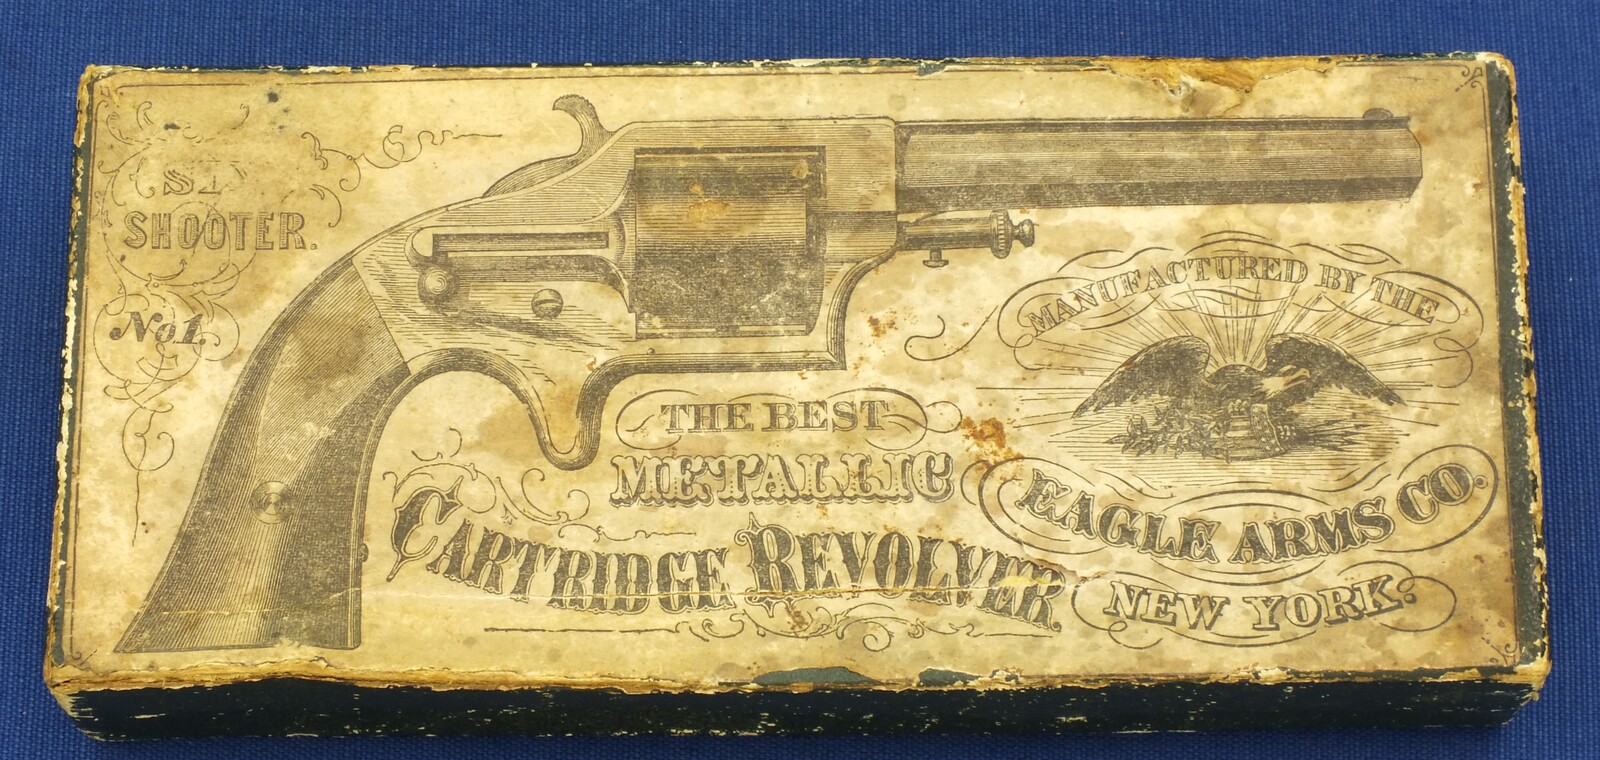 An antique American Merwin & Bray Fire-Arms Co. NY Plant's Frontloading Pocket 5 shot Revolver in it's original hinge top cardboard box .30 cup-primed caliber, length 20,5 cm, in very good condition. Price 1.600 euro